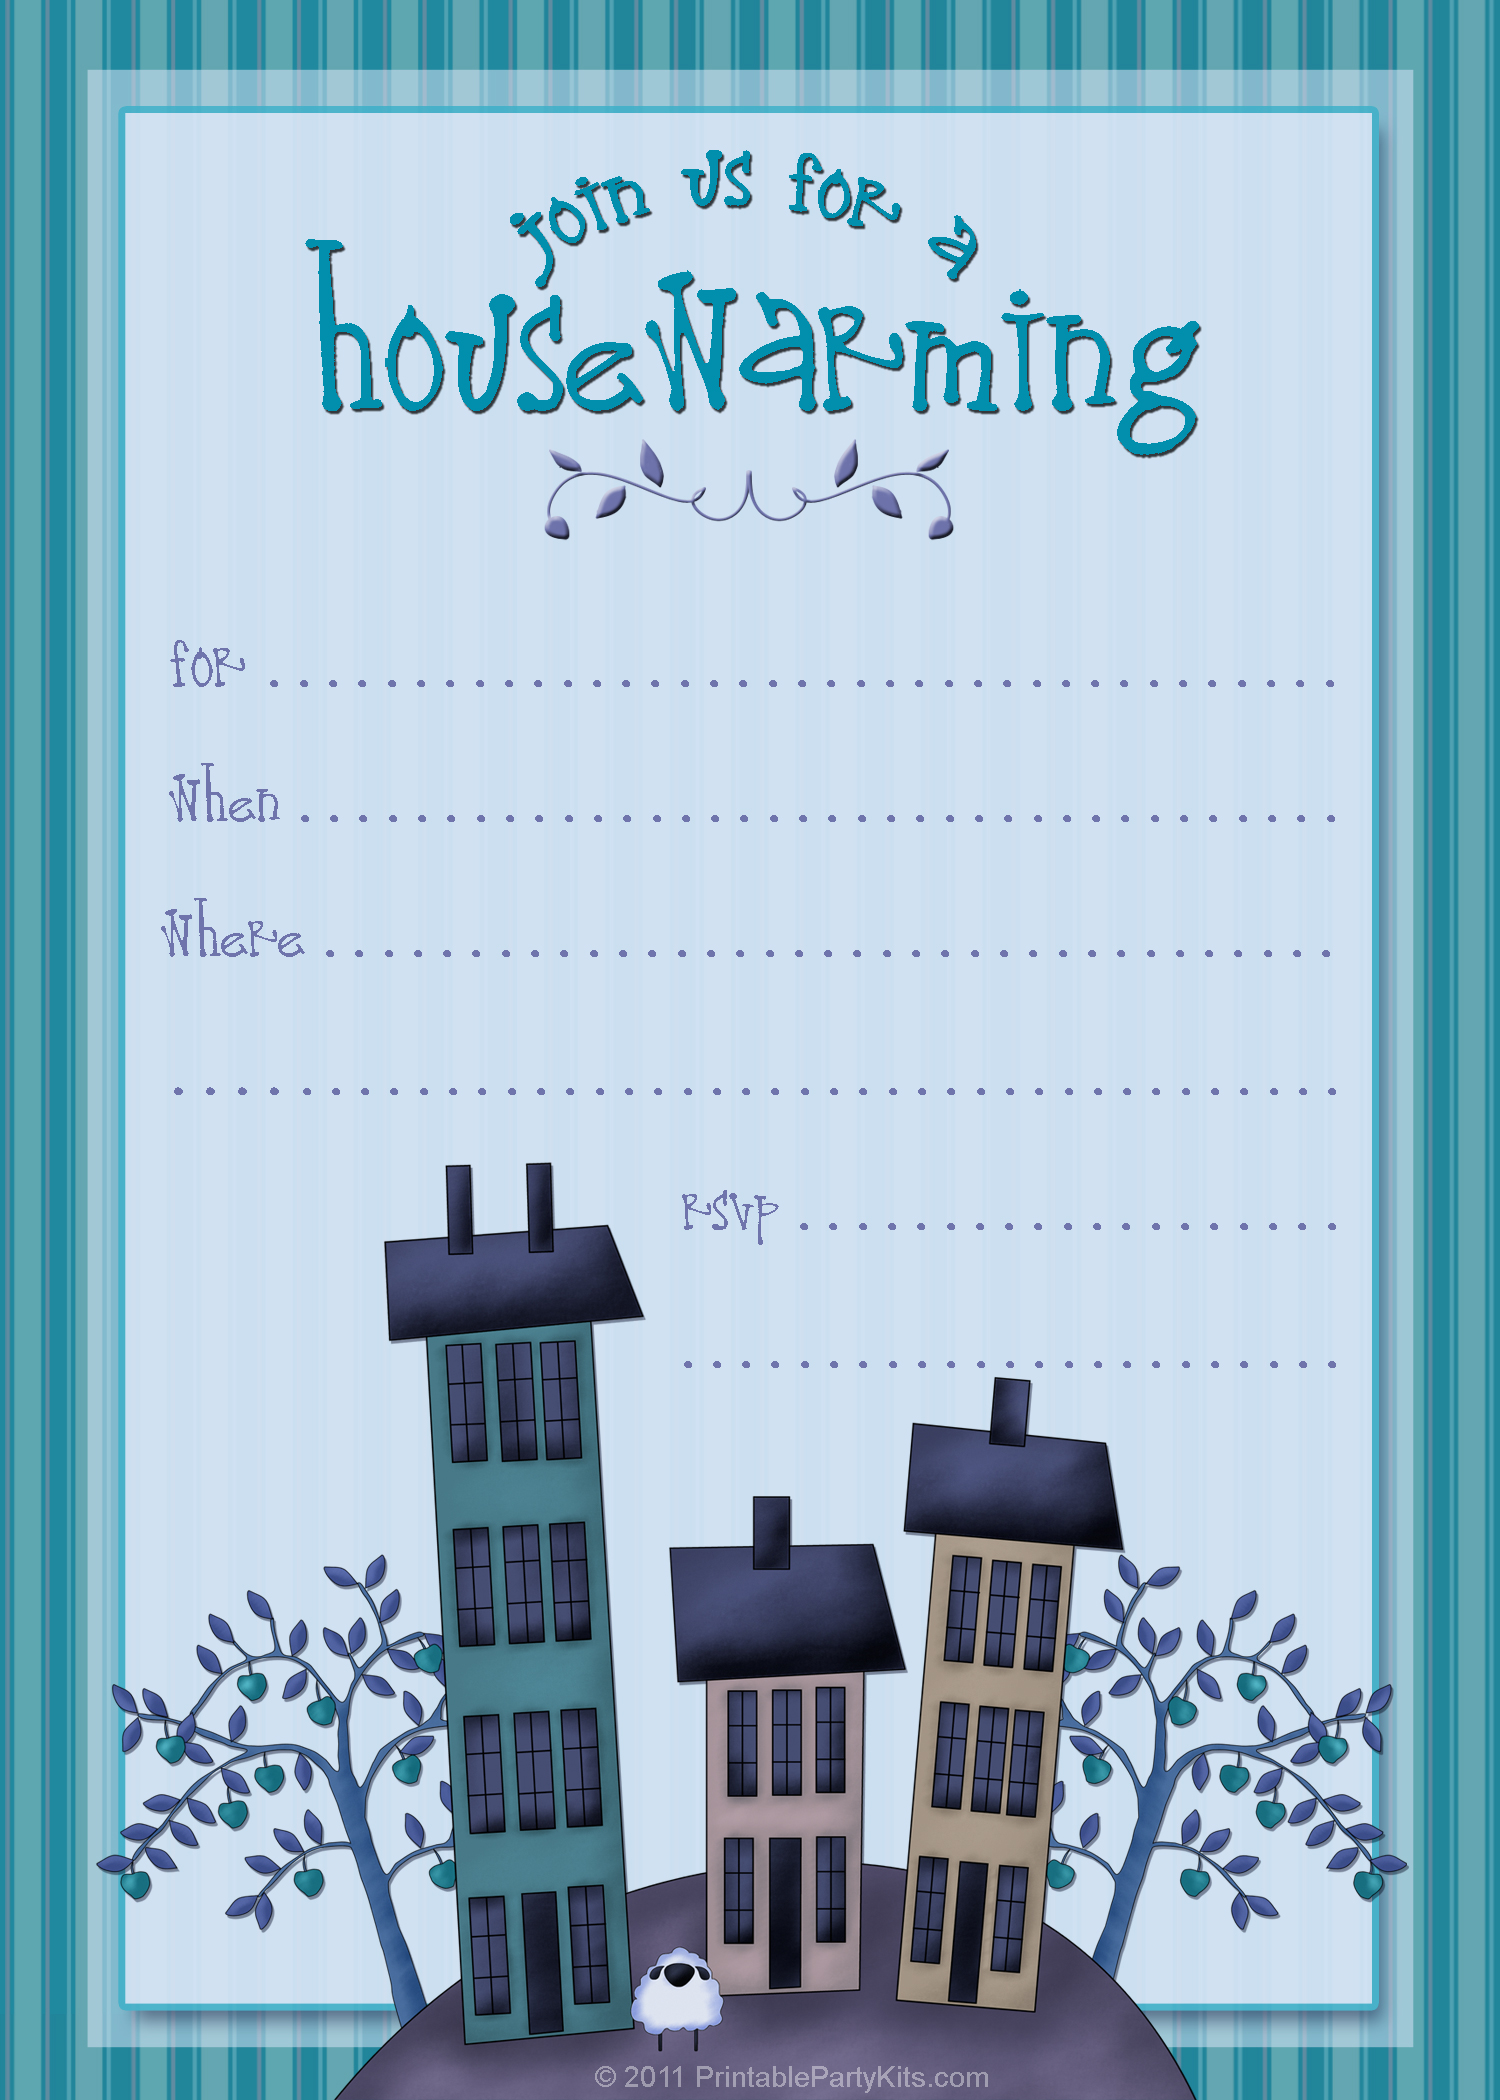 free house warming clipart - Clipground